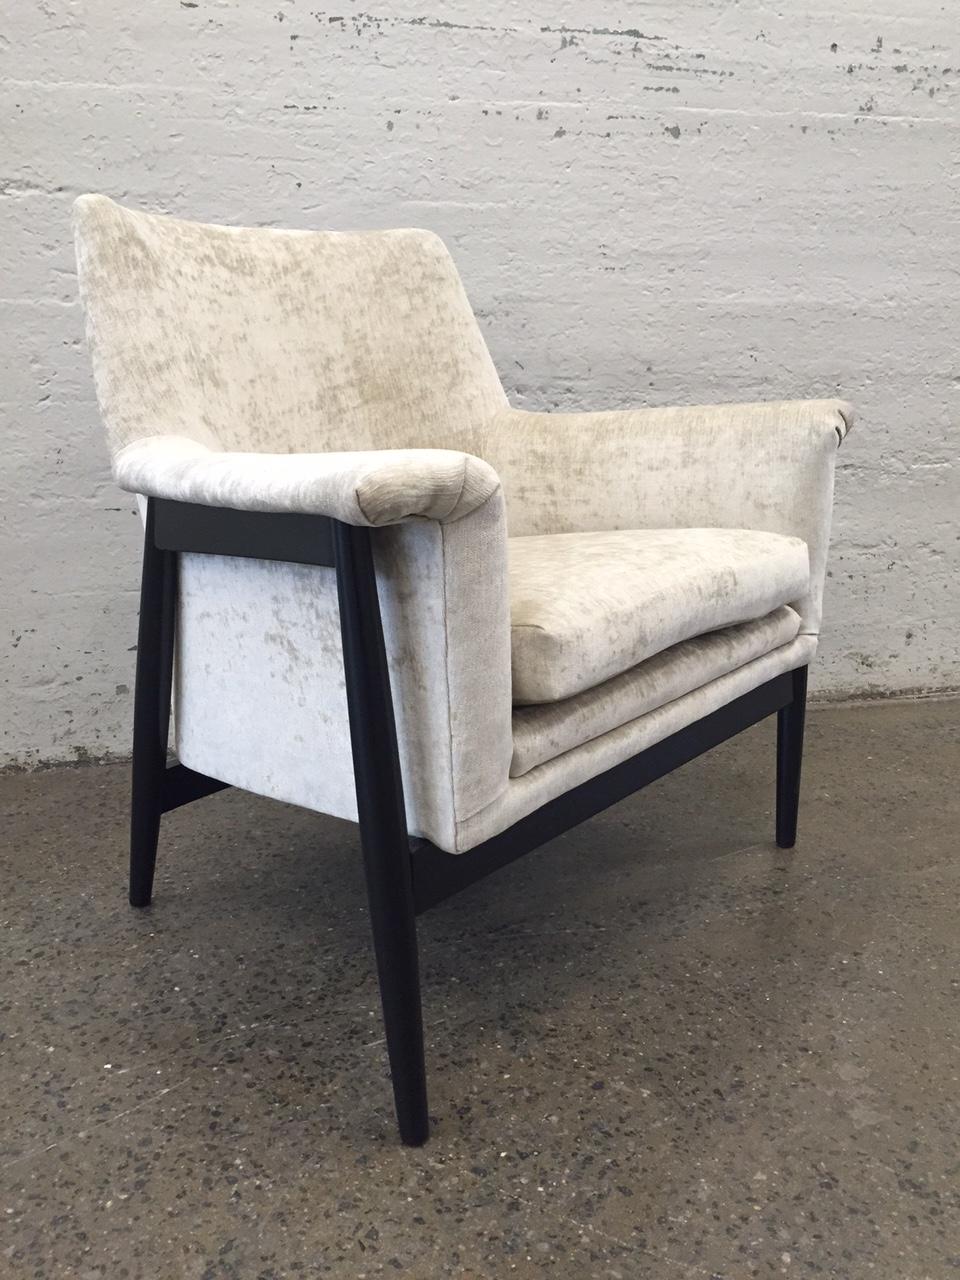 Pair of Danish modern lounge chairs. Chairs have a black lacquered frame and are newly upholstered in velvet. Ib Kofod Larsen style. Chairs have been refinished and reupholstered. Mid Century Modern.